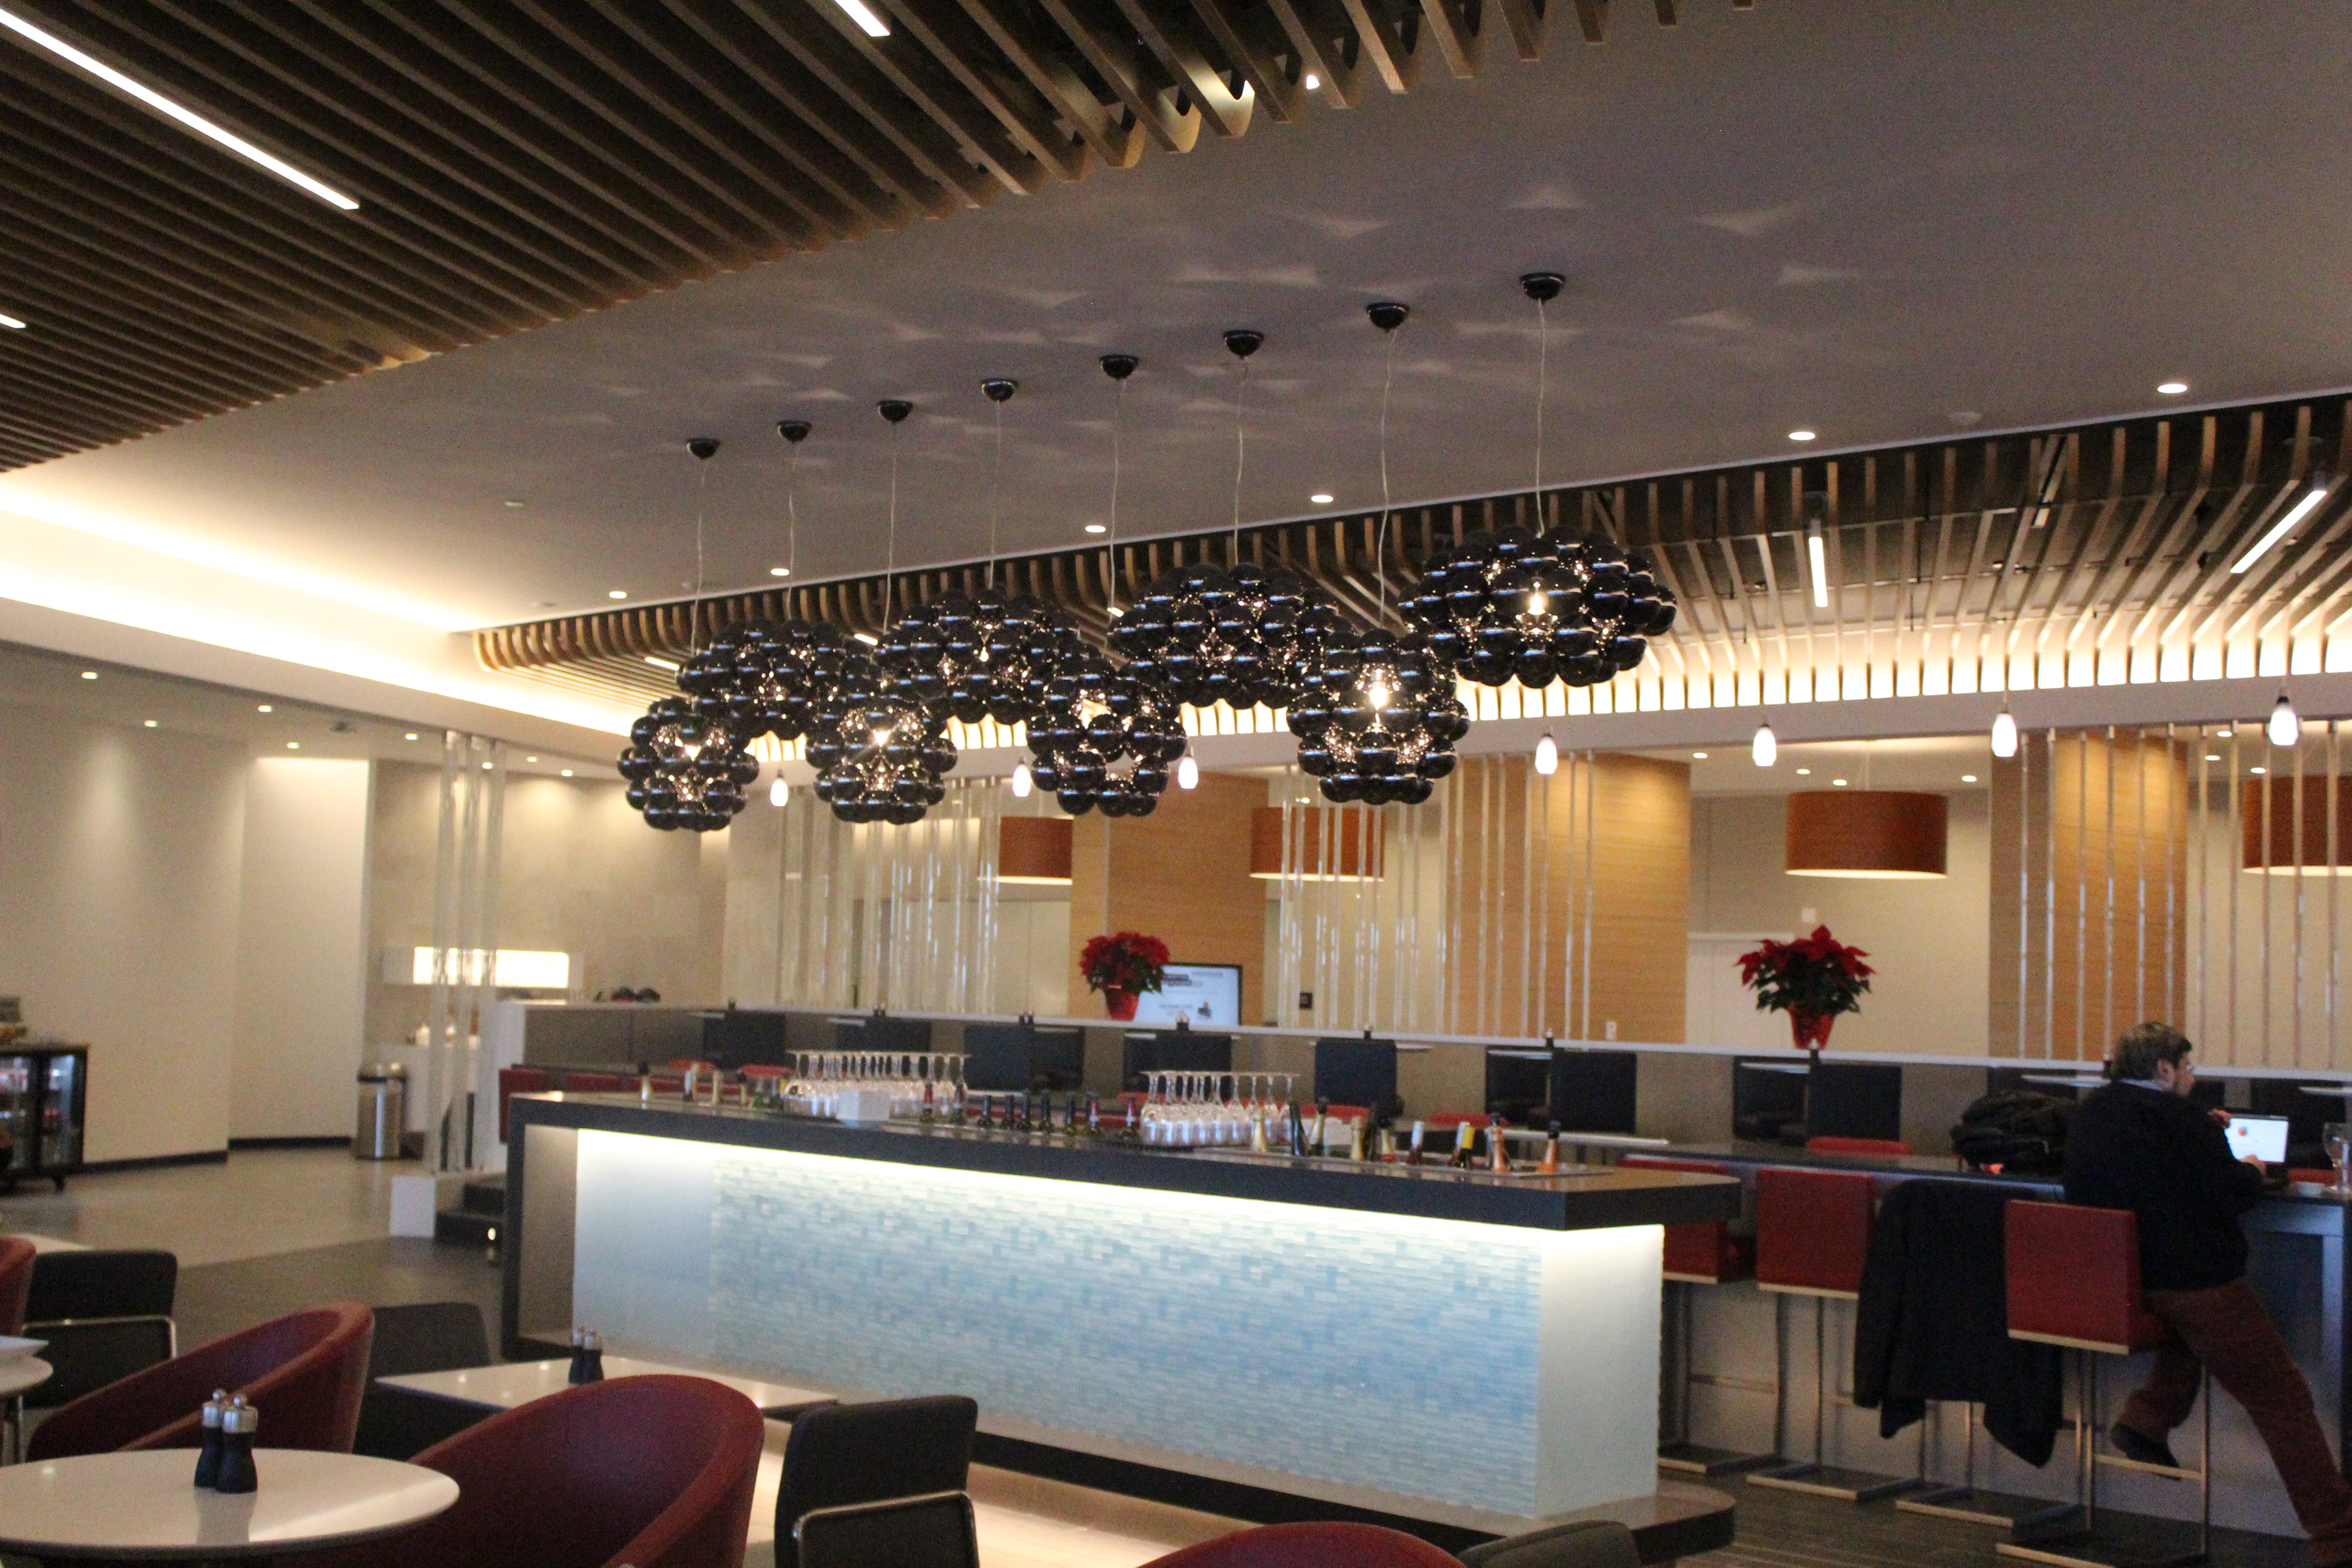 New American Airlines First Class Lounge at JFK center bar